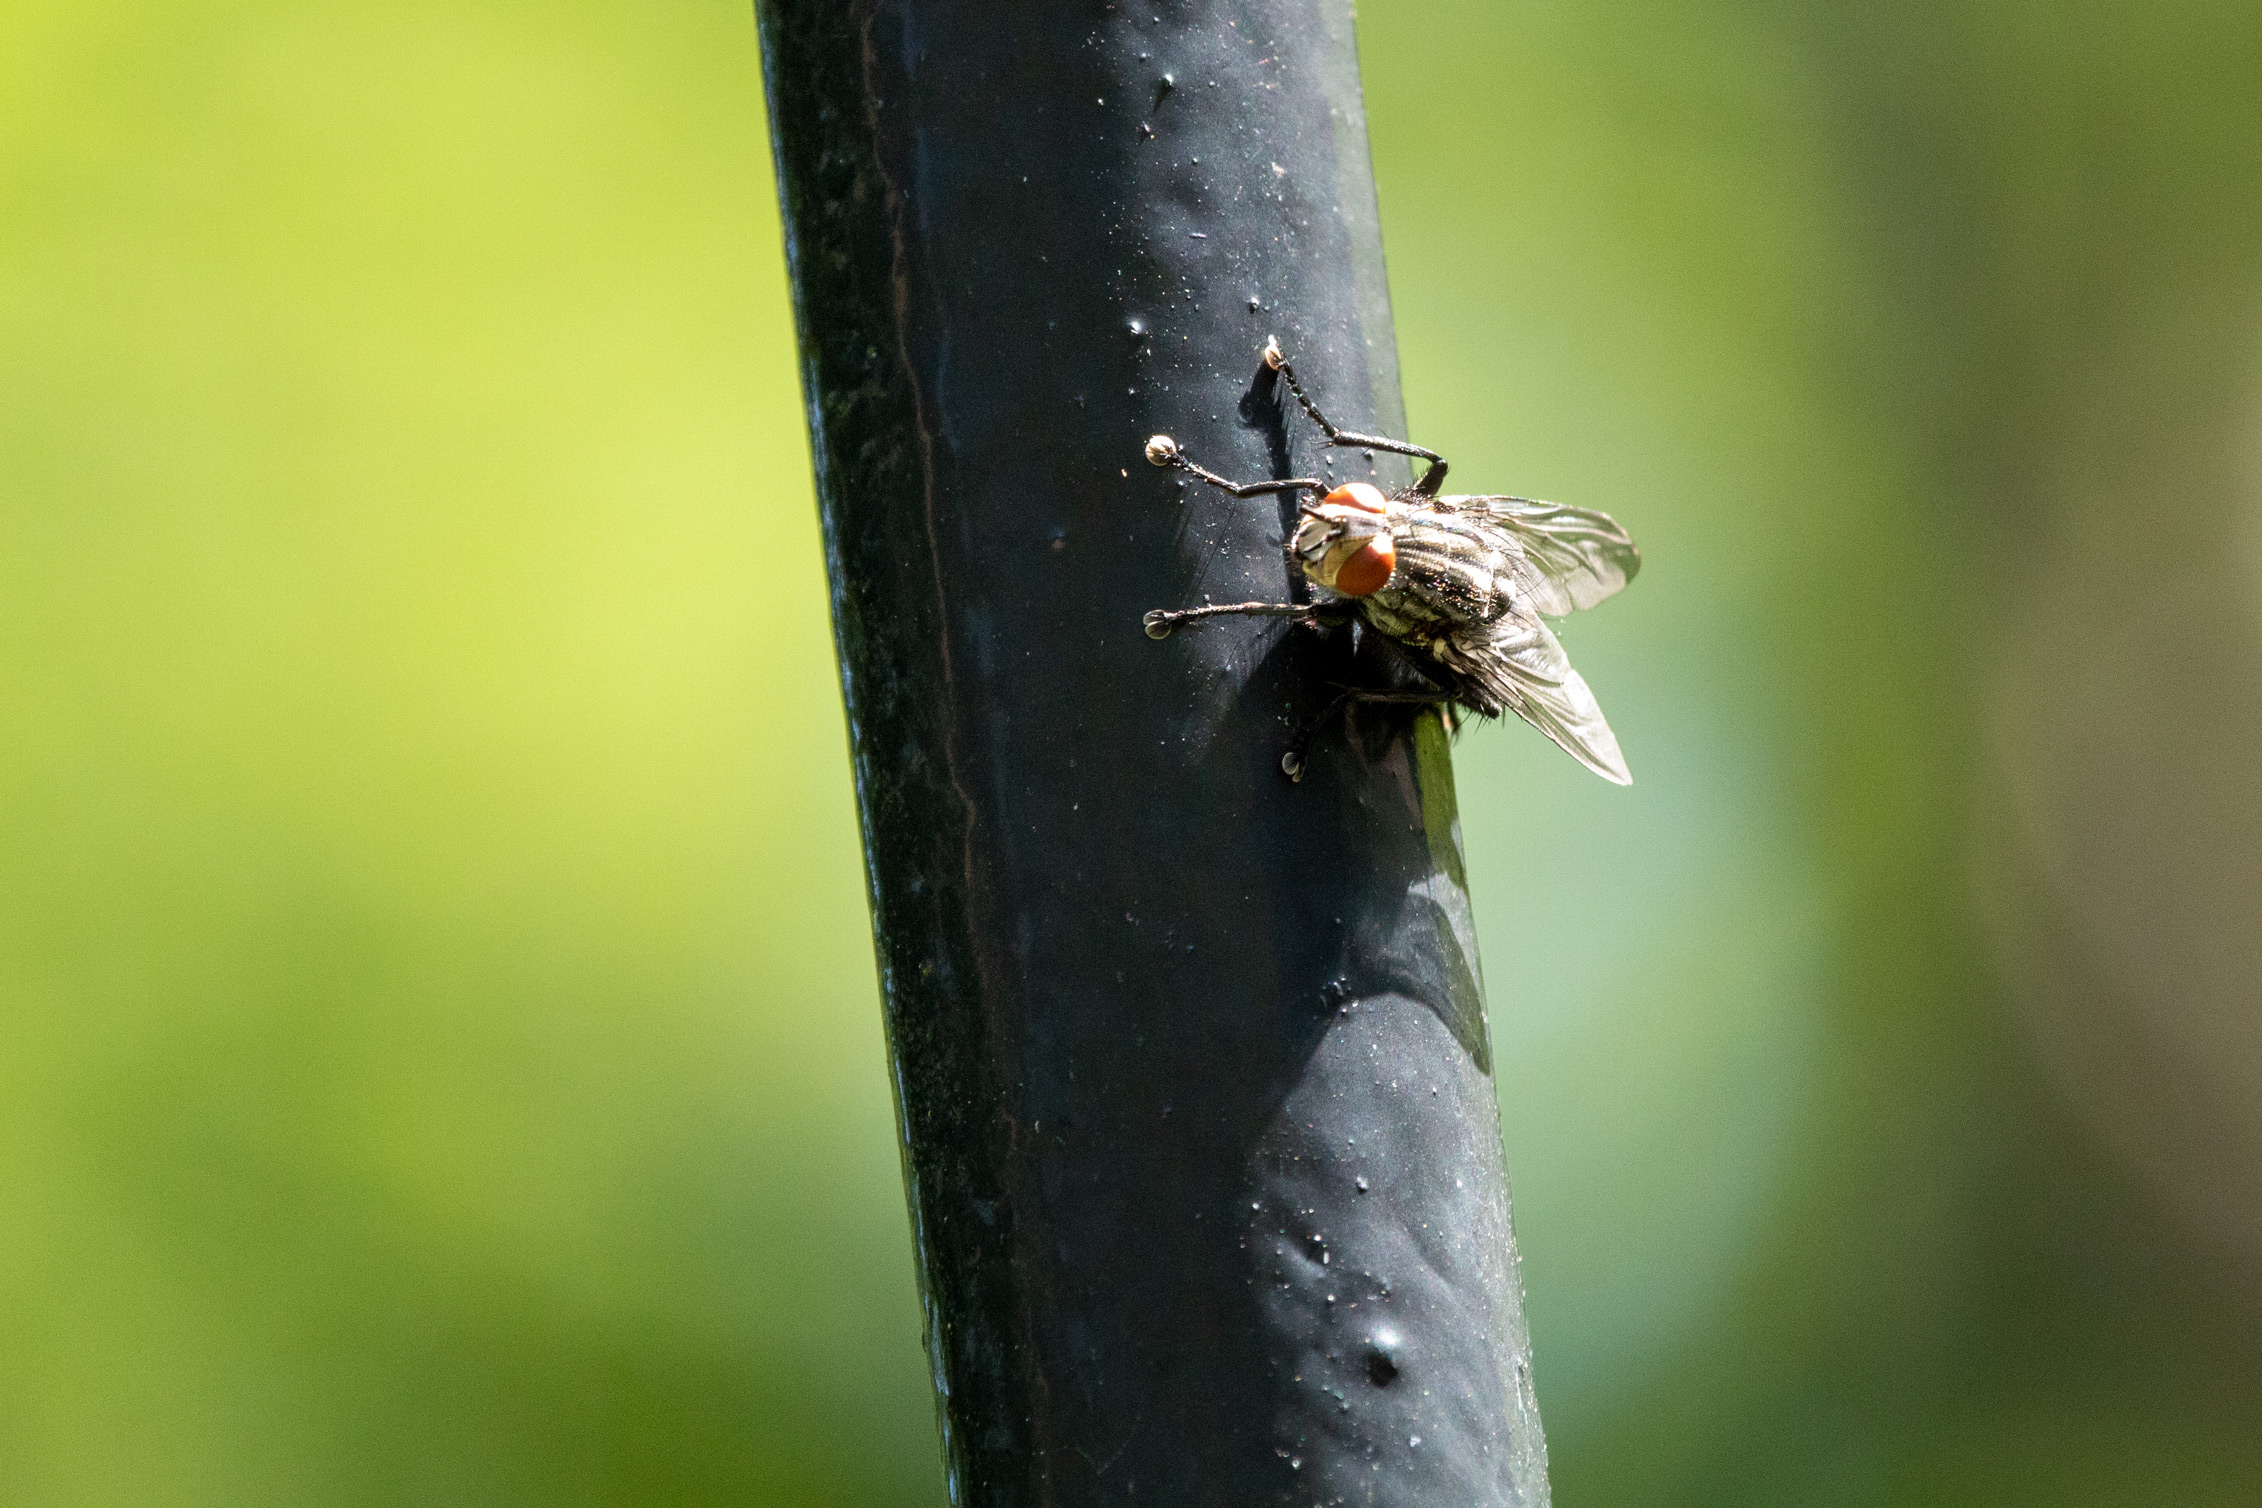 Fly clinging sideways on a black-painted round metal fence post